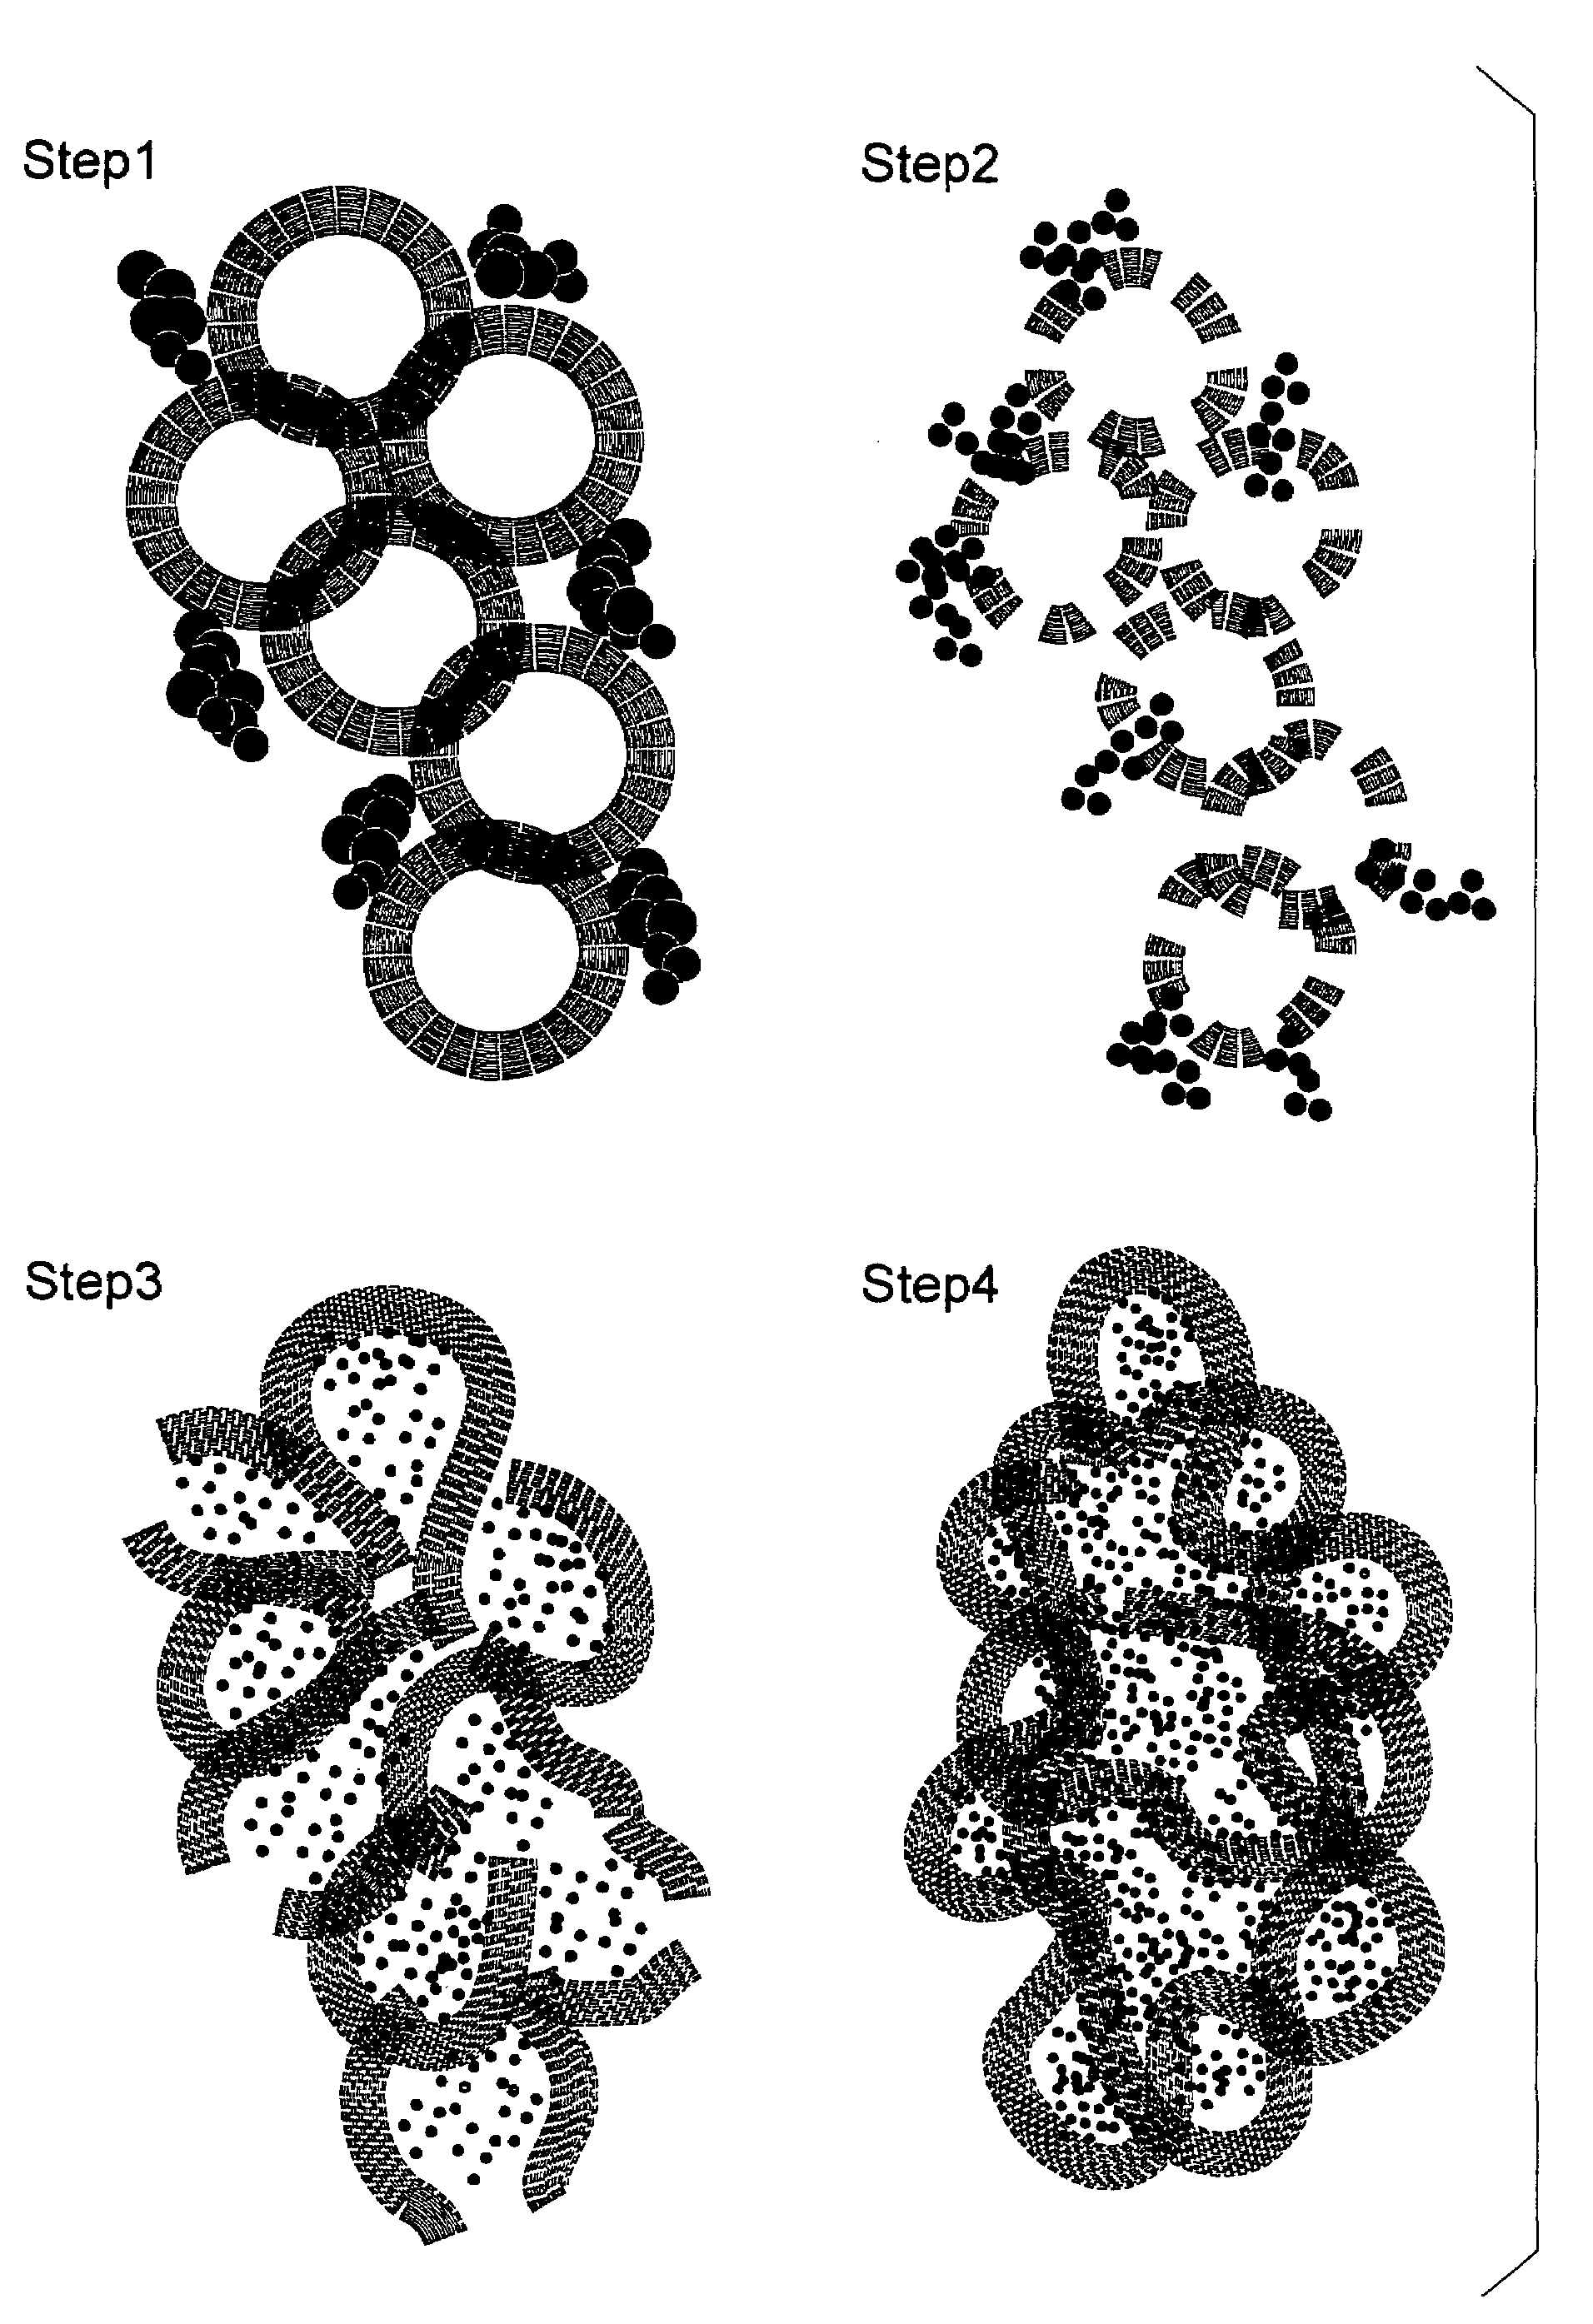 Nanocarbon composite structure having ruthenium oxide trapped therein